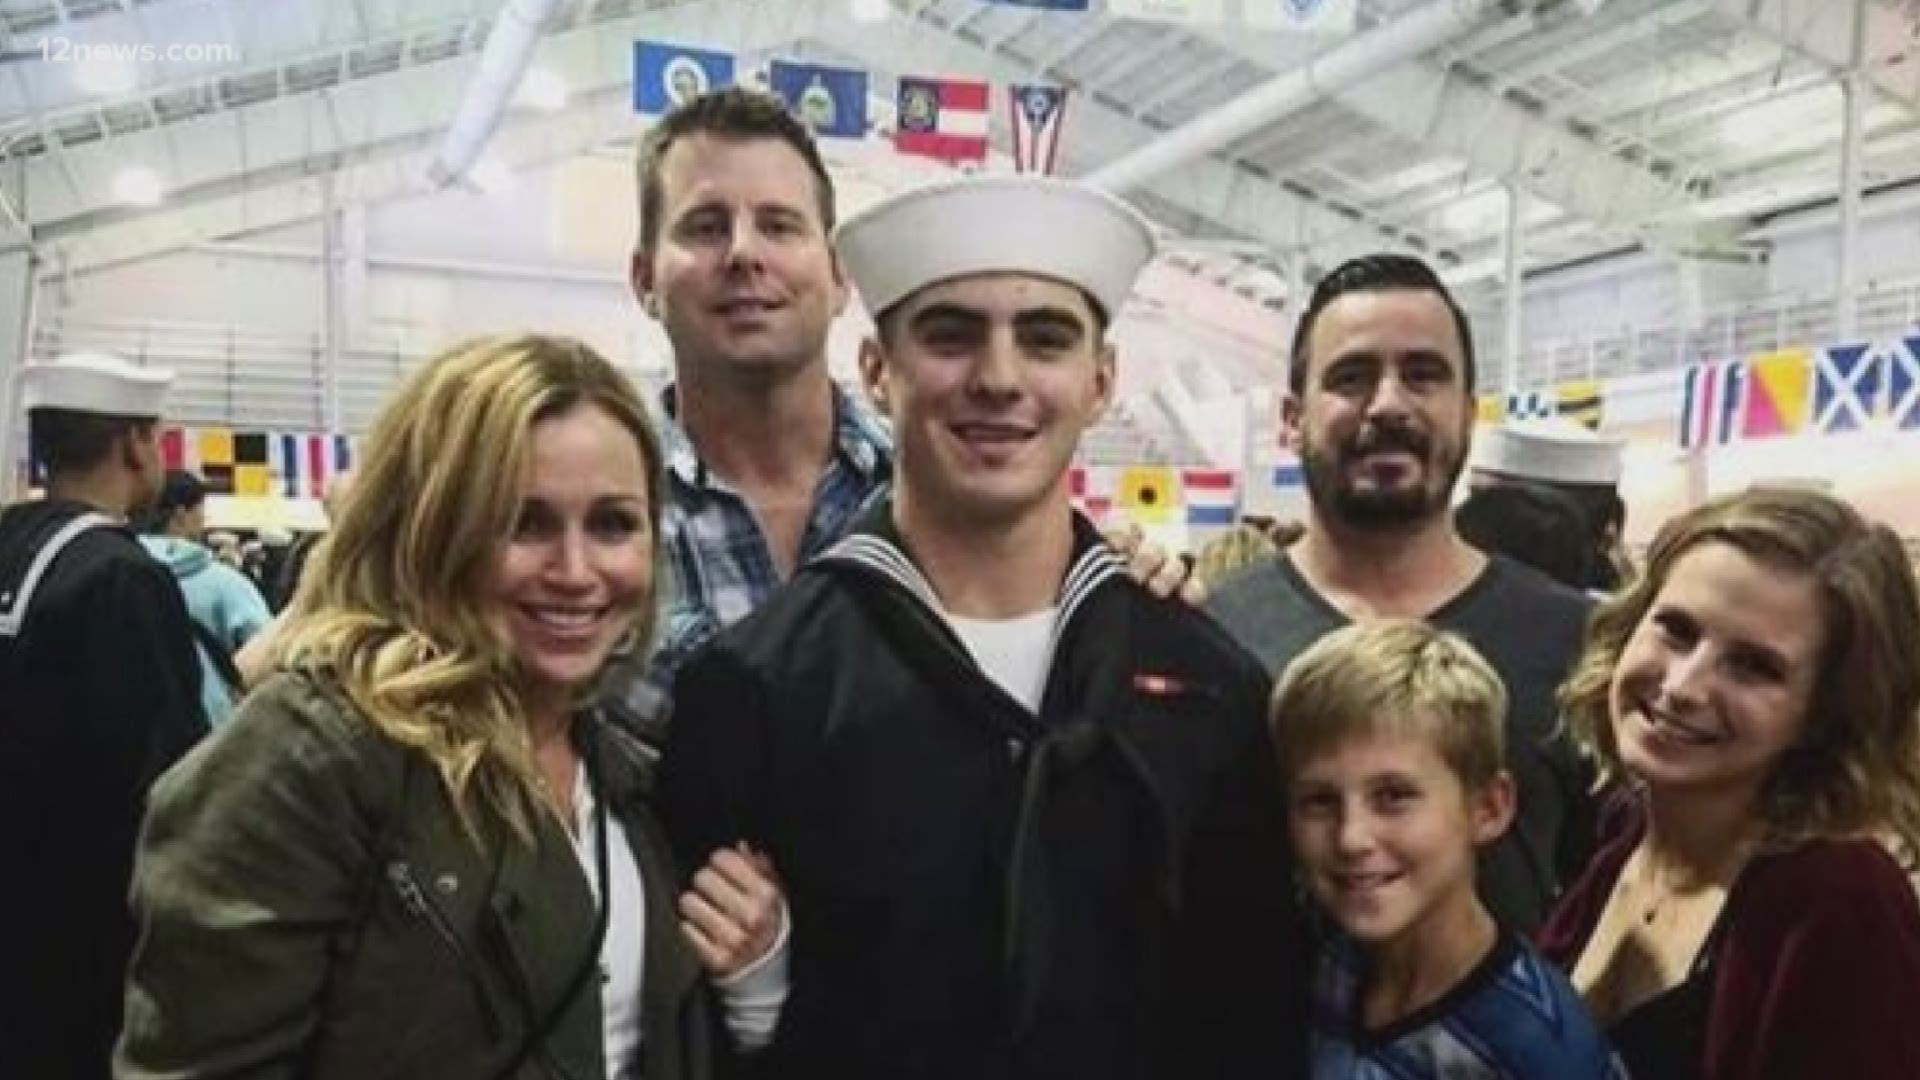 Colton wasn't listed as the next of kin to his step-father, so the Navy denied him leave when his step-father died and Colton wanted to come home for the funeral. What happened next is truly heart-warming.